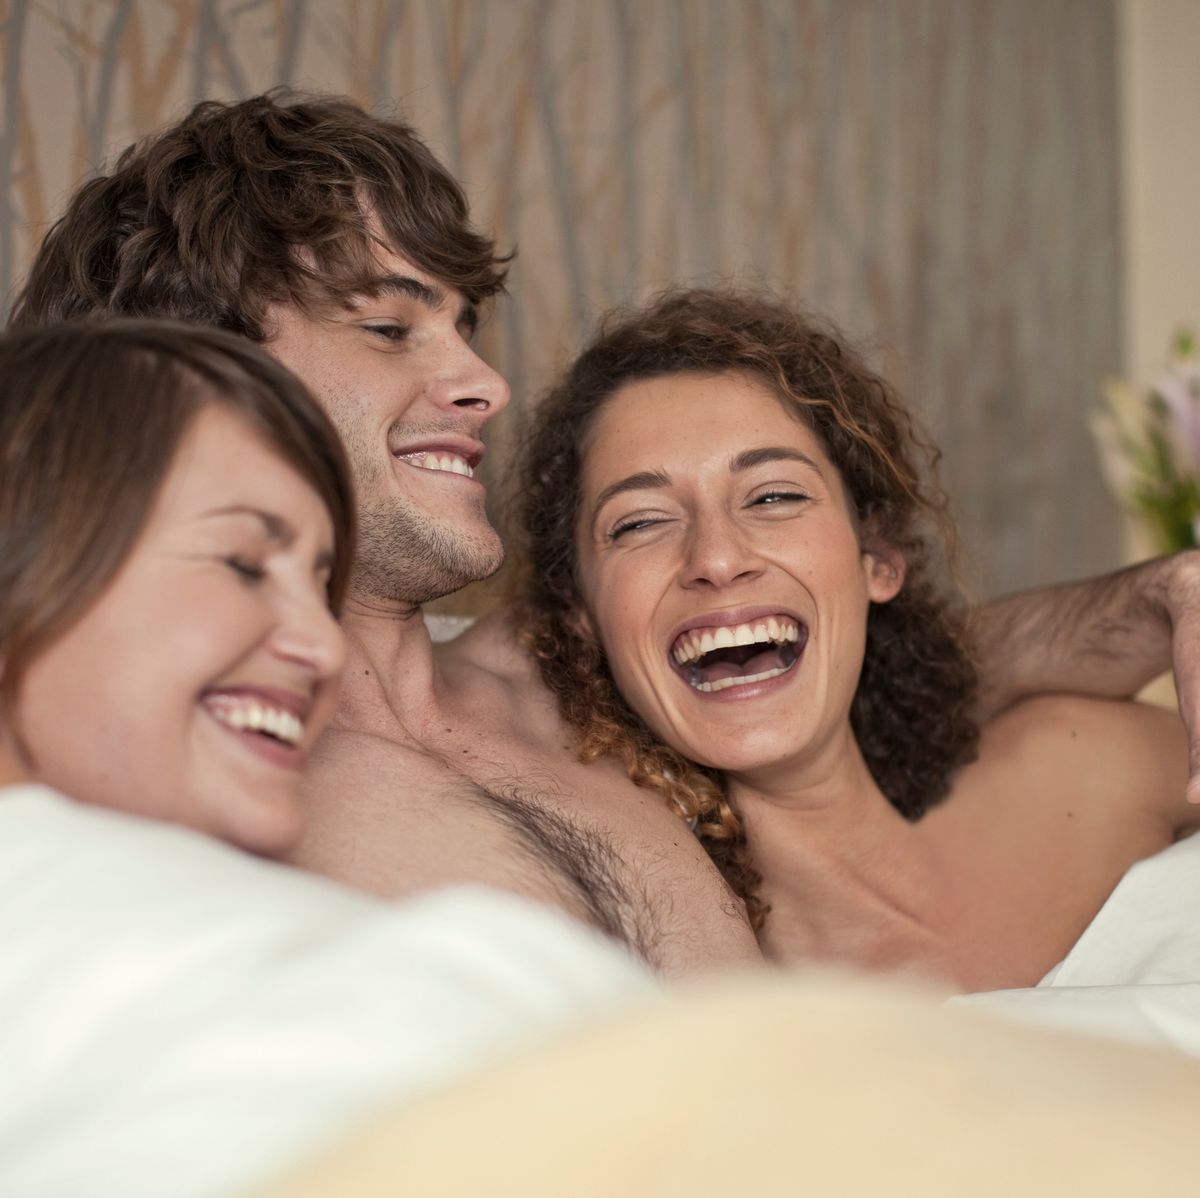 Group Sex Couples 69 - 10 Threesome Sex Positions That Are Super Hot and Totally Doable